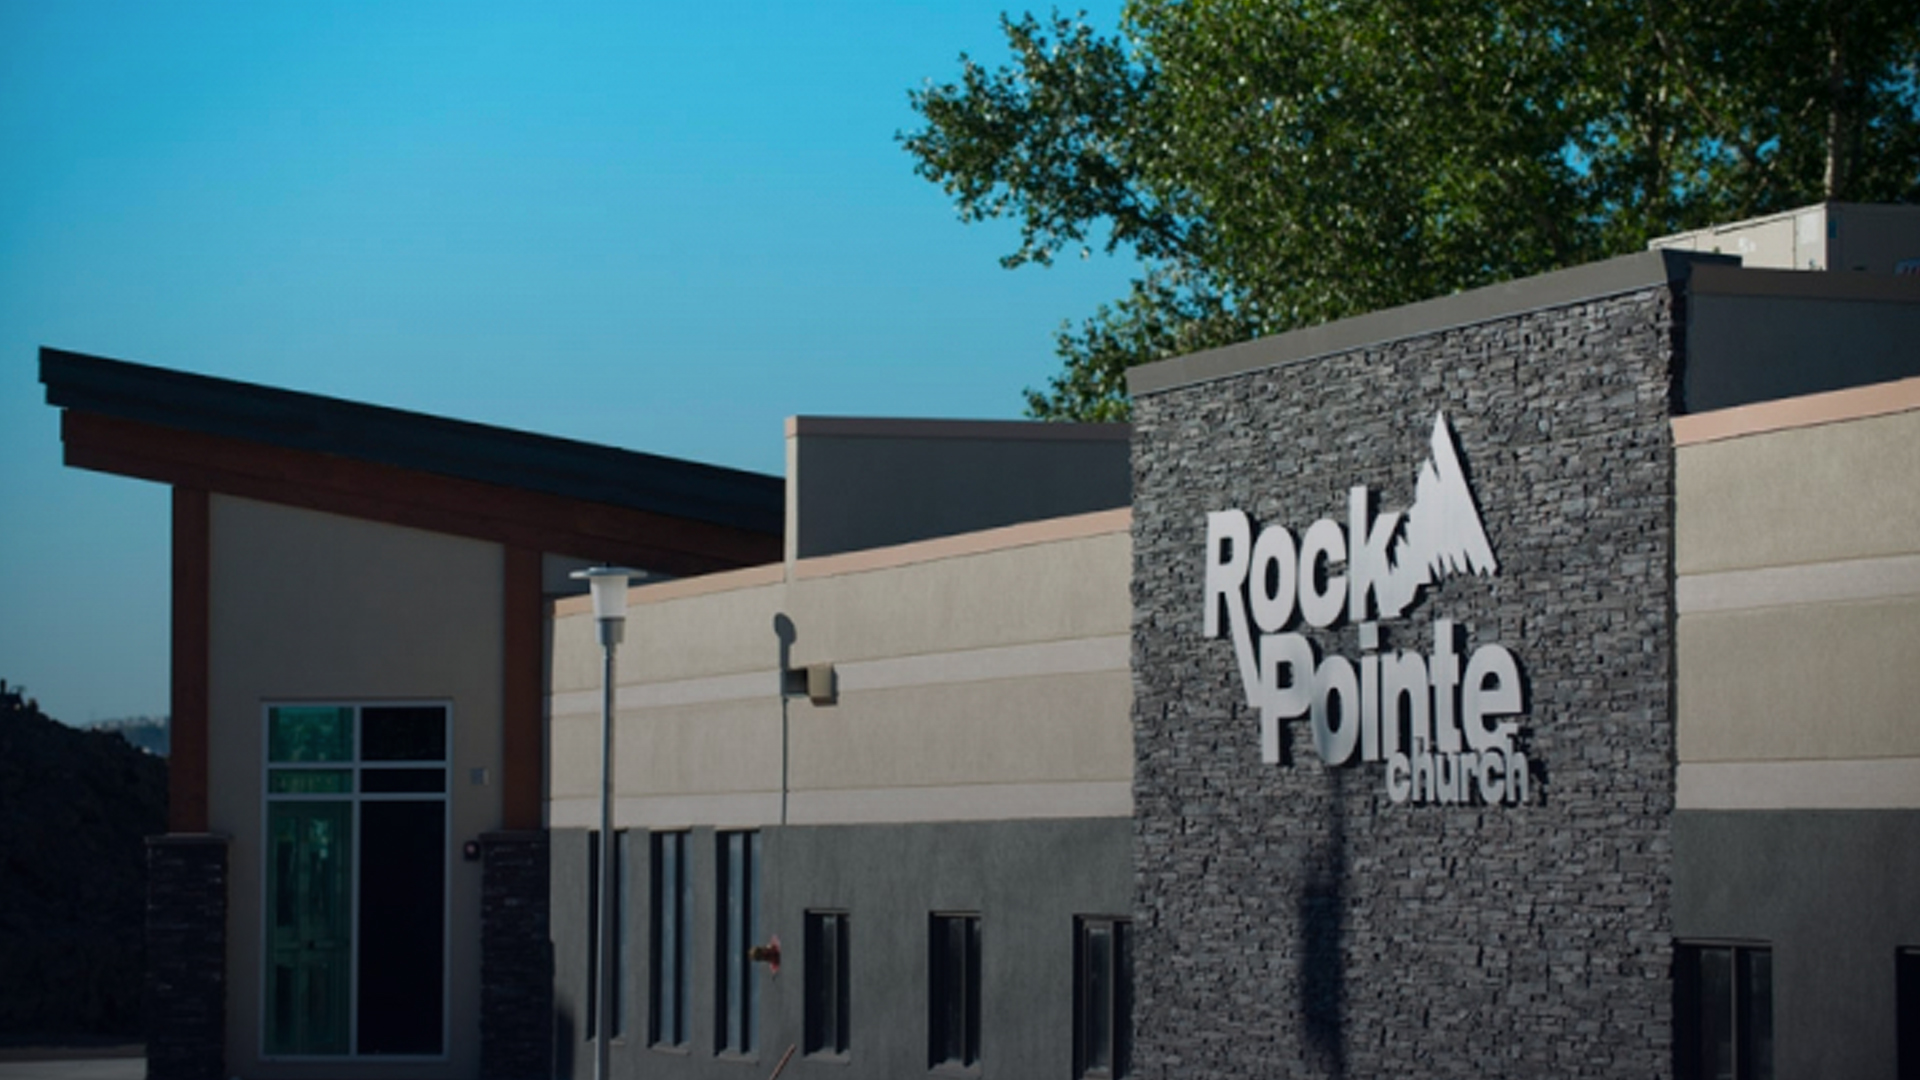 A view of the exterior building of RockPointe Bowridge